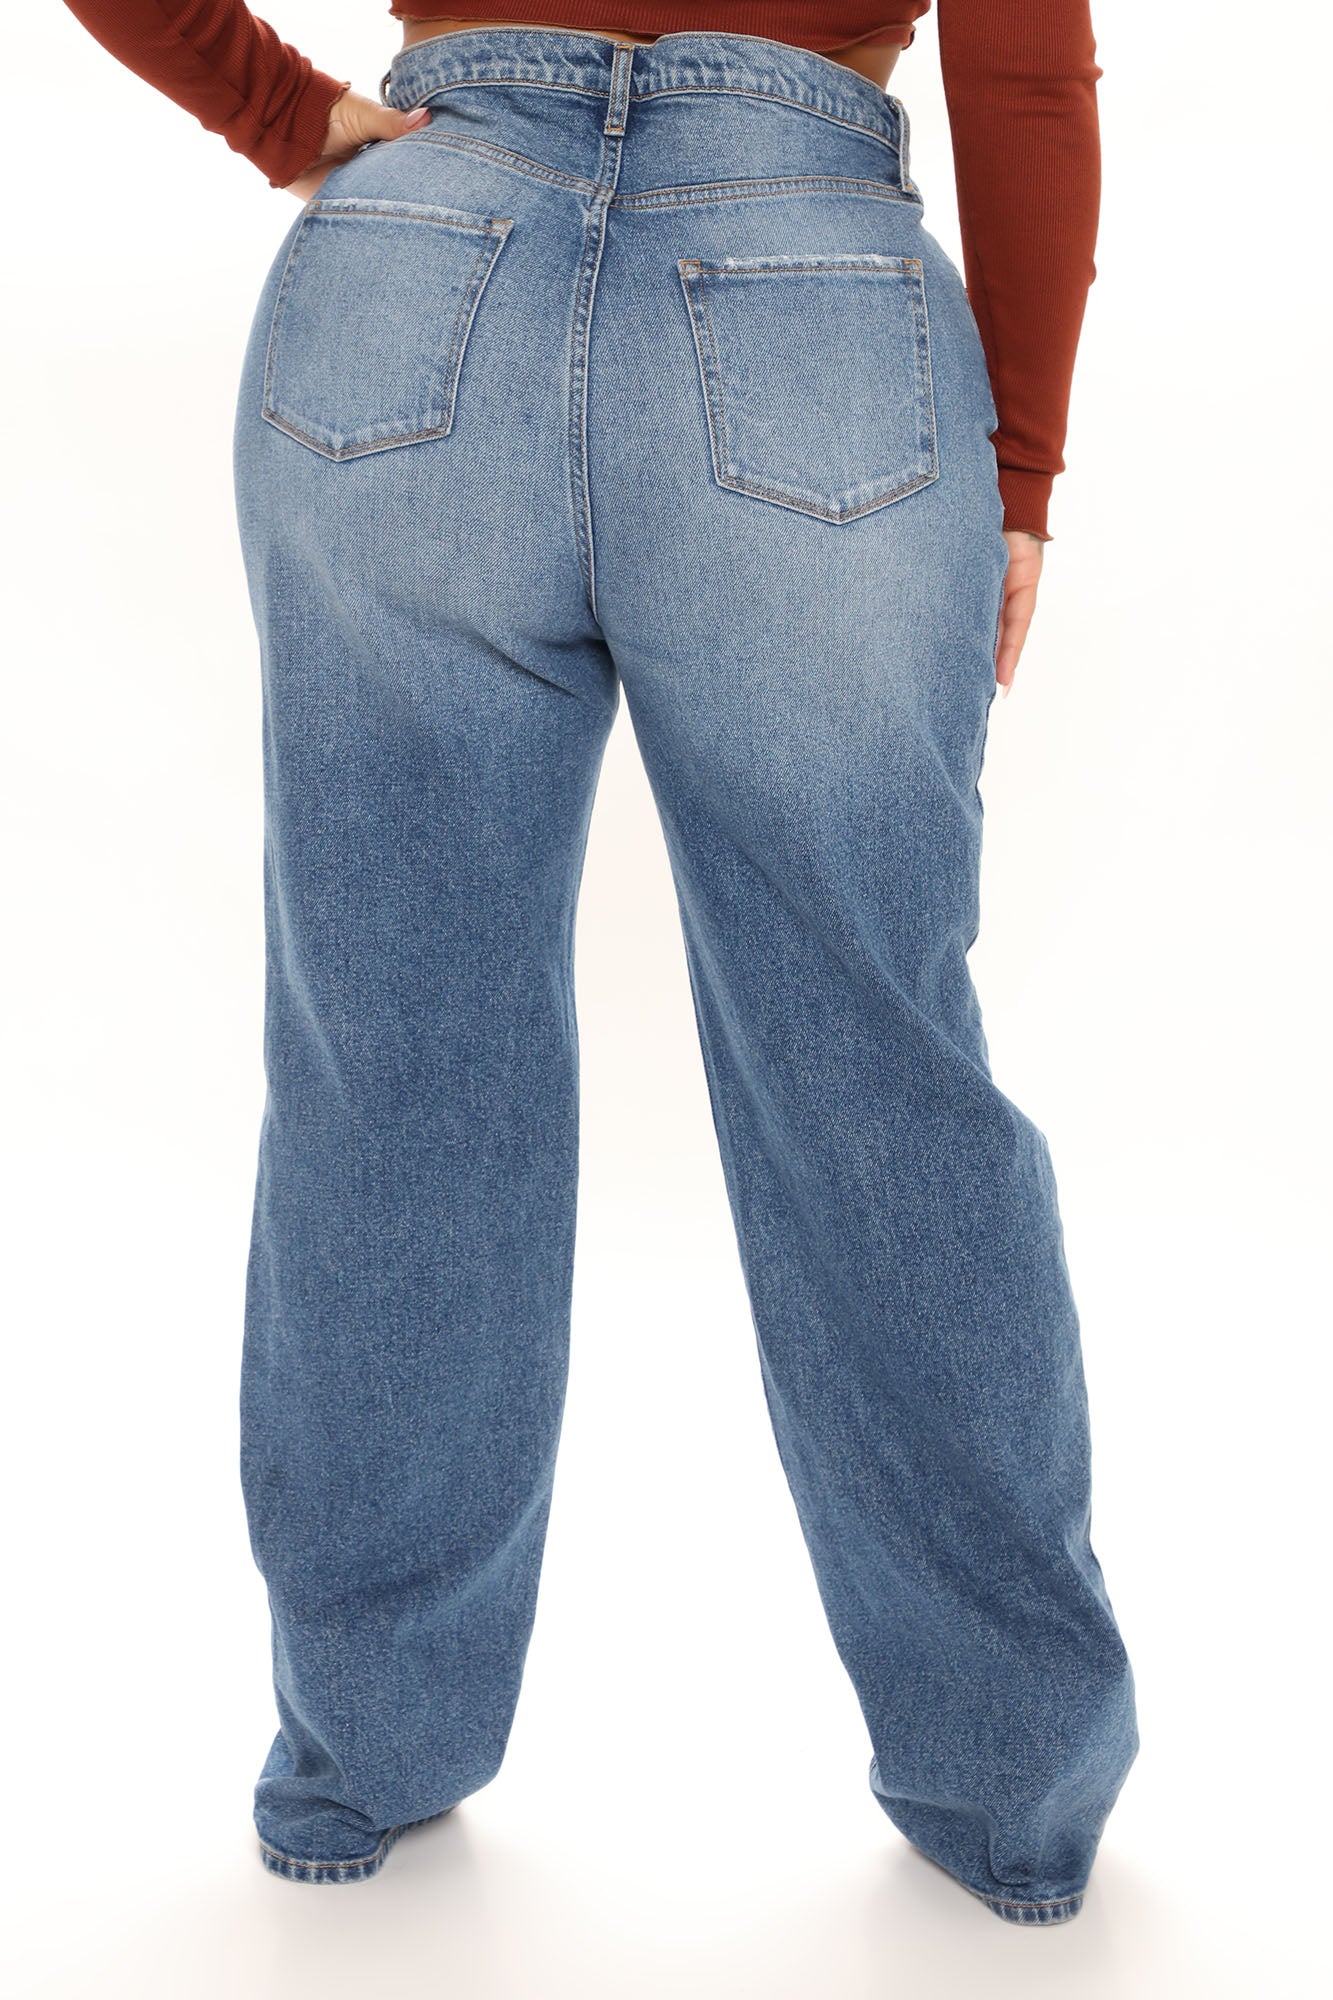 Can't You Relax Straight Leg Jeans - Medium Blue Wash